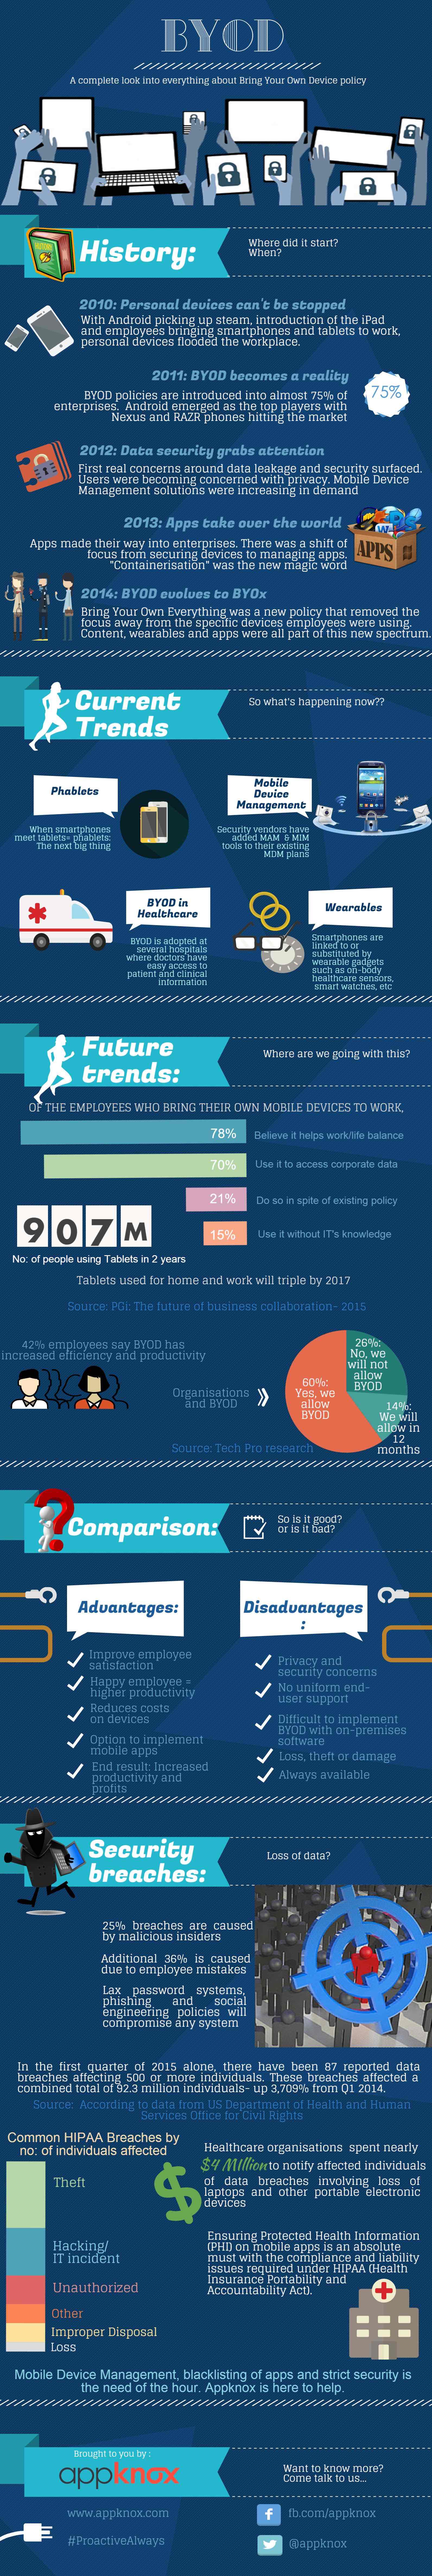 [Infographic] All You Need To Know About BYOD